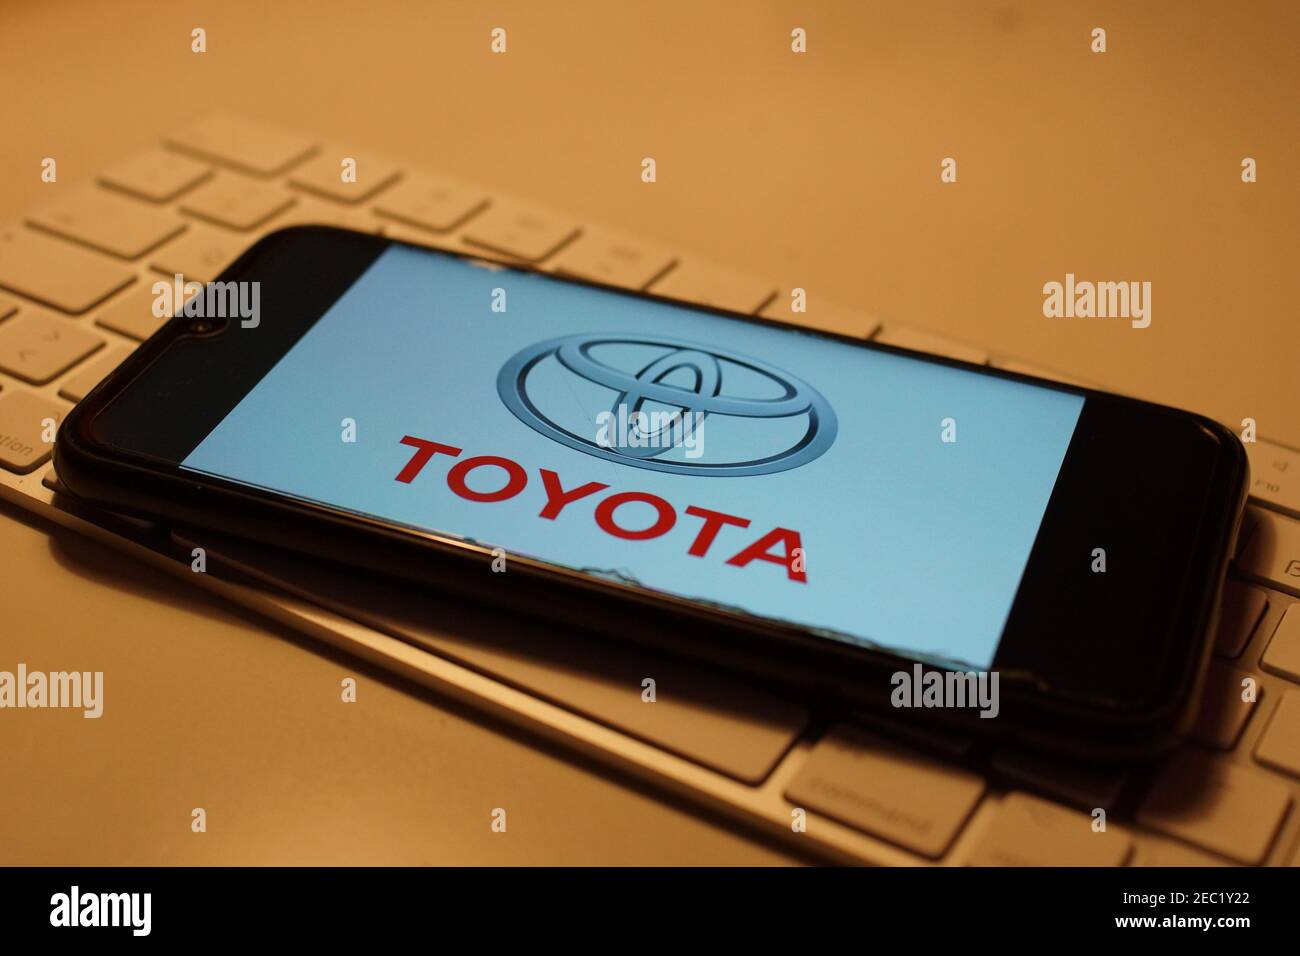 Smartphone with Toyota logo on computer keyboard Stock Photo